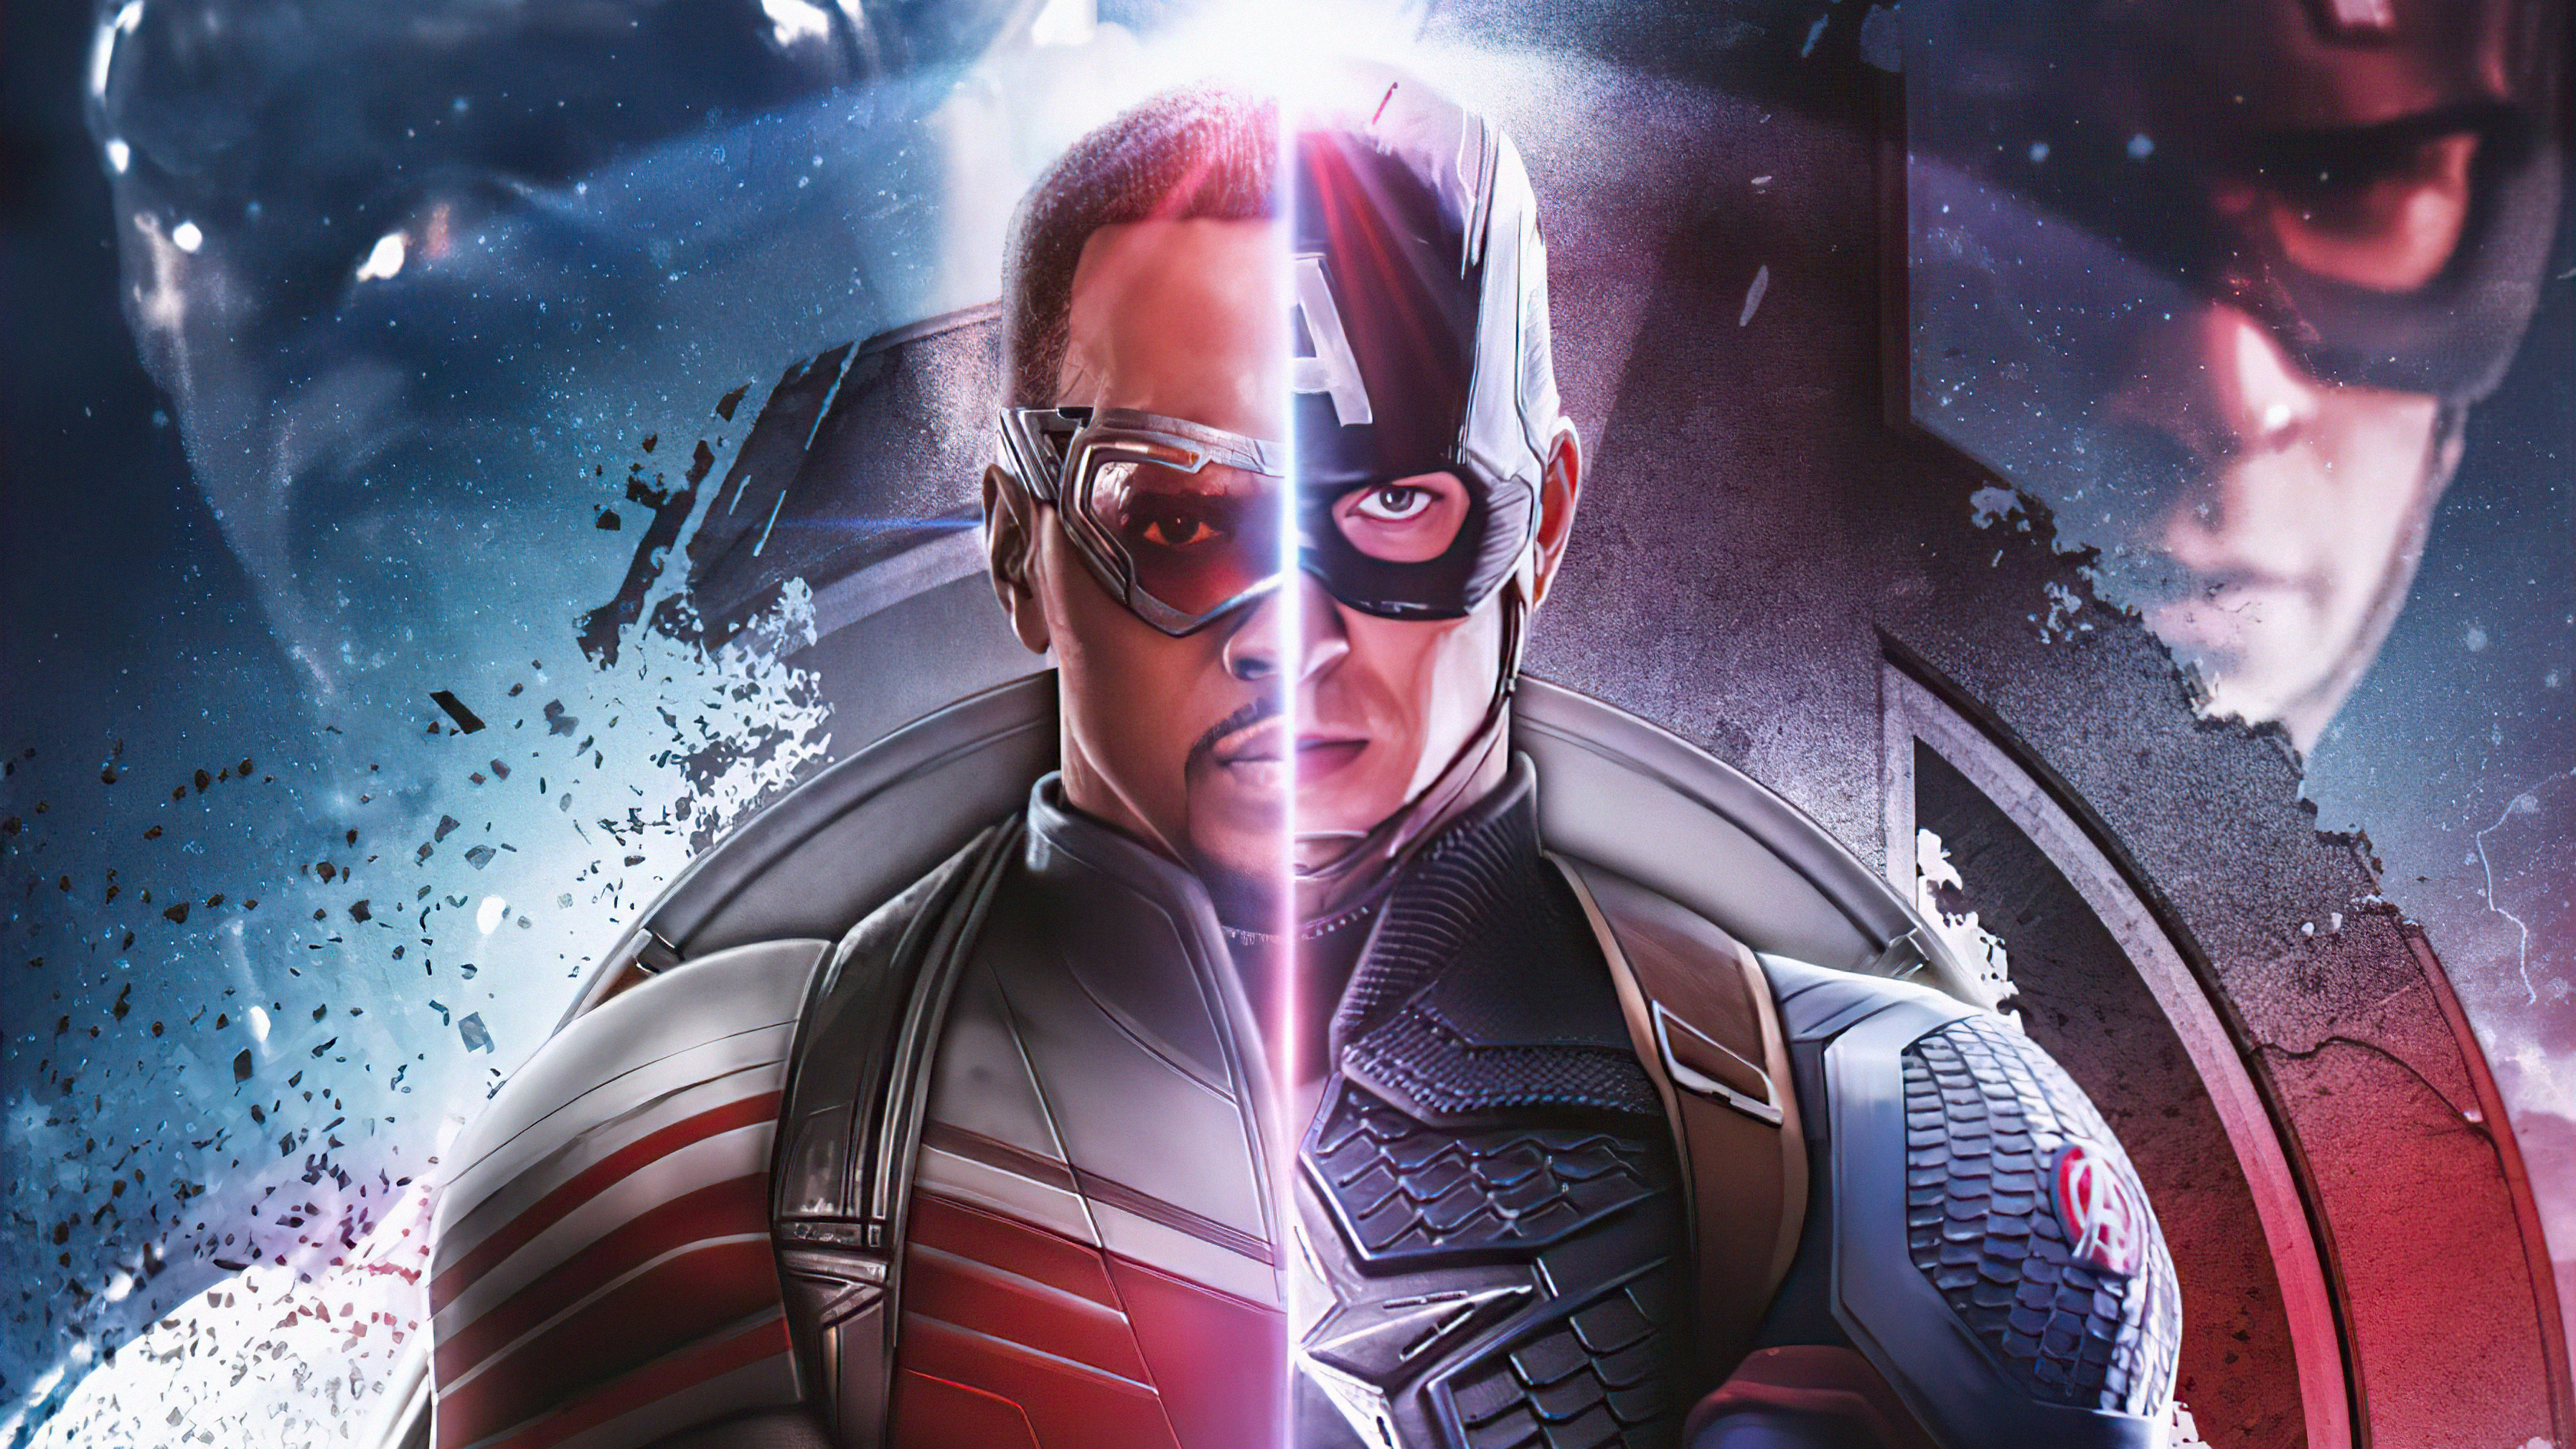 Anthony Mackie As Captain America Wallpapers